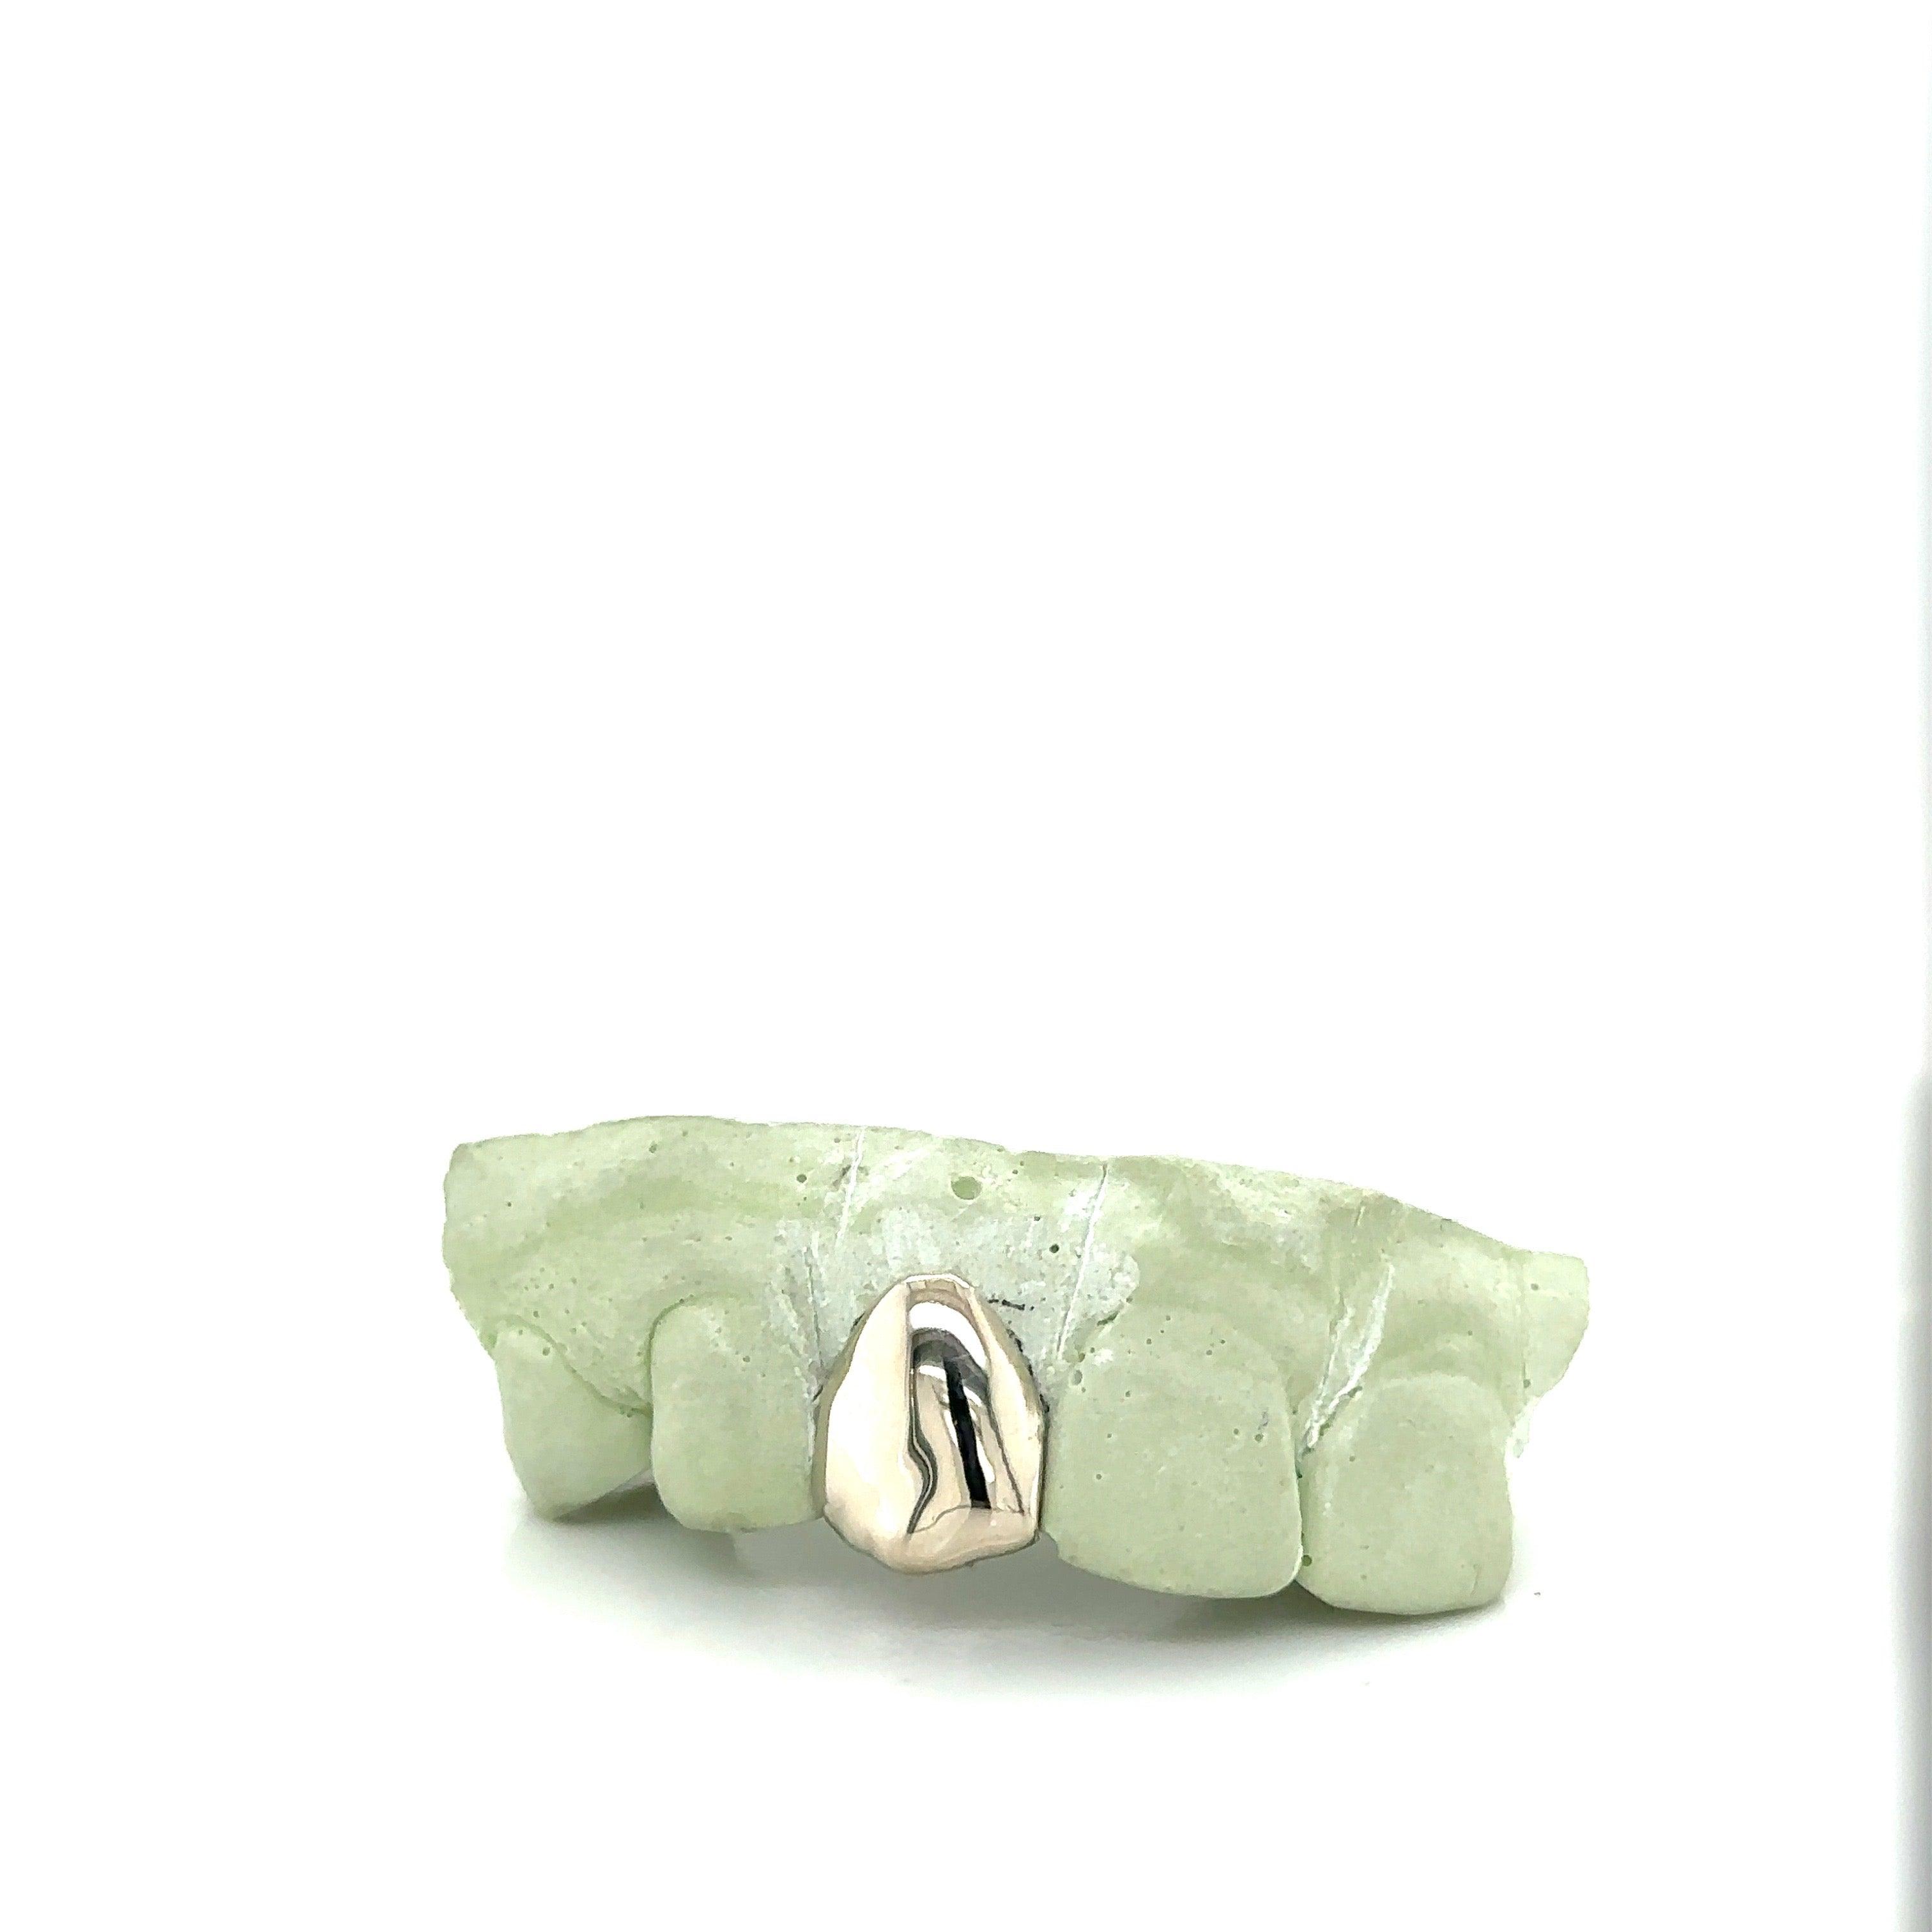 White Gold Right Side Incisor Tooth - Seattle Gold Grillz